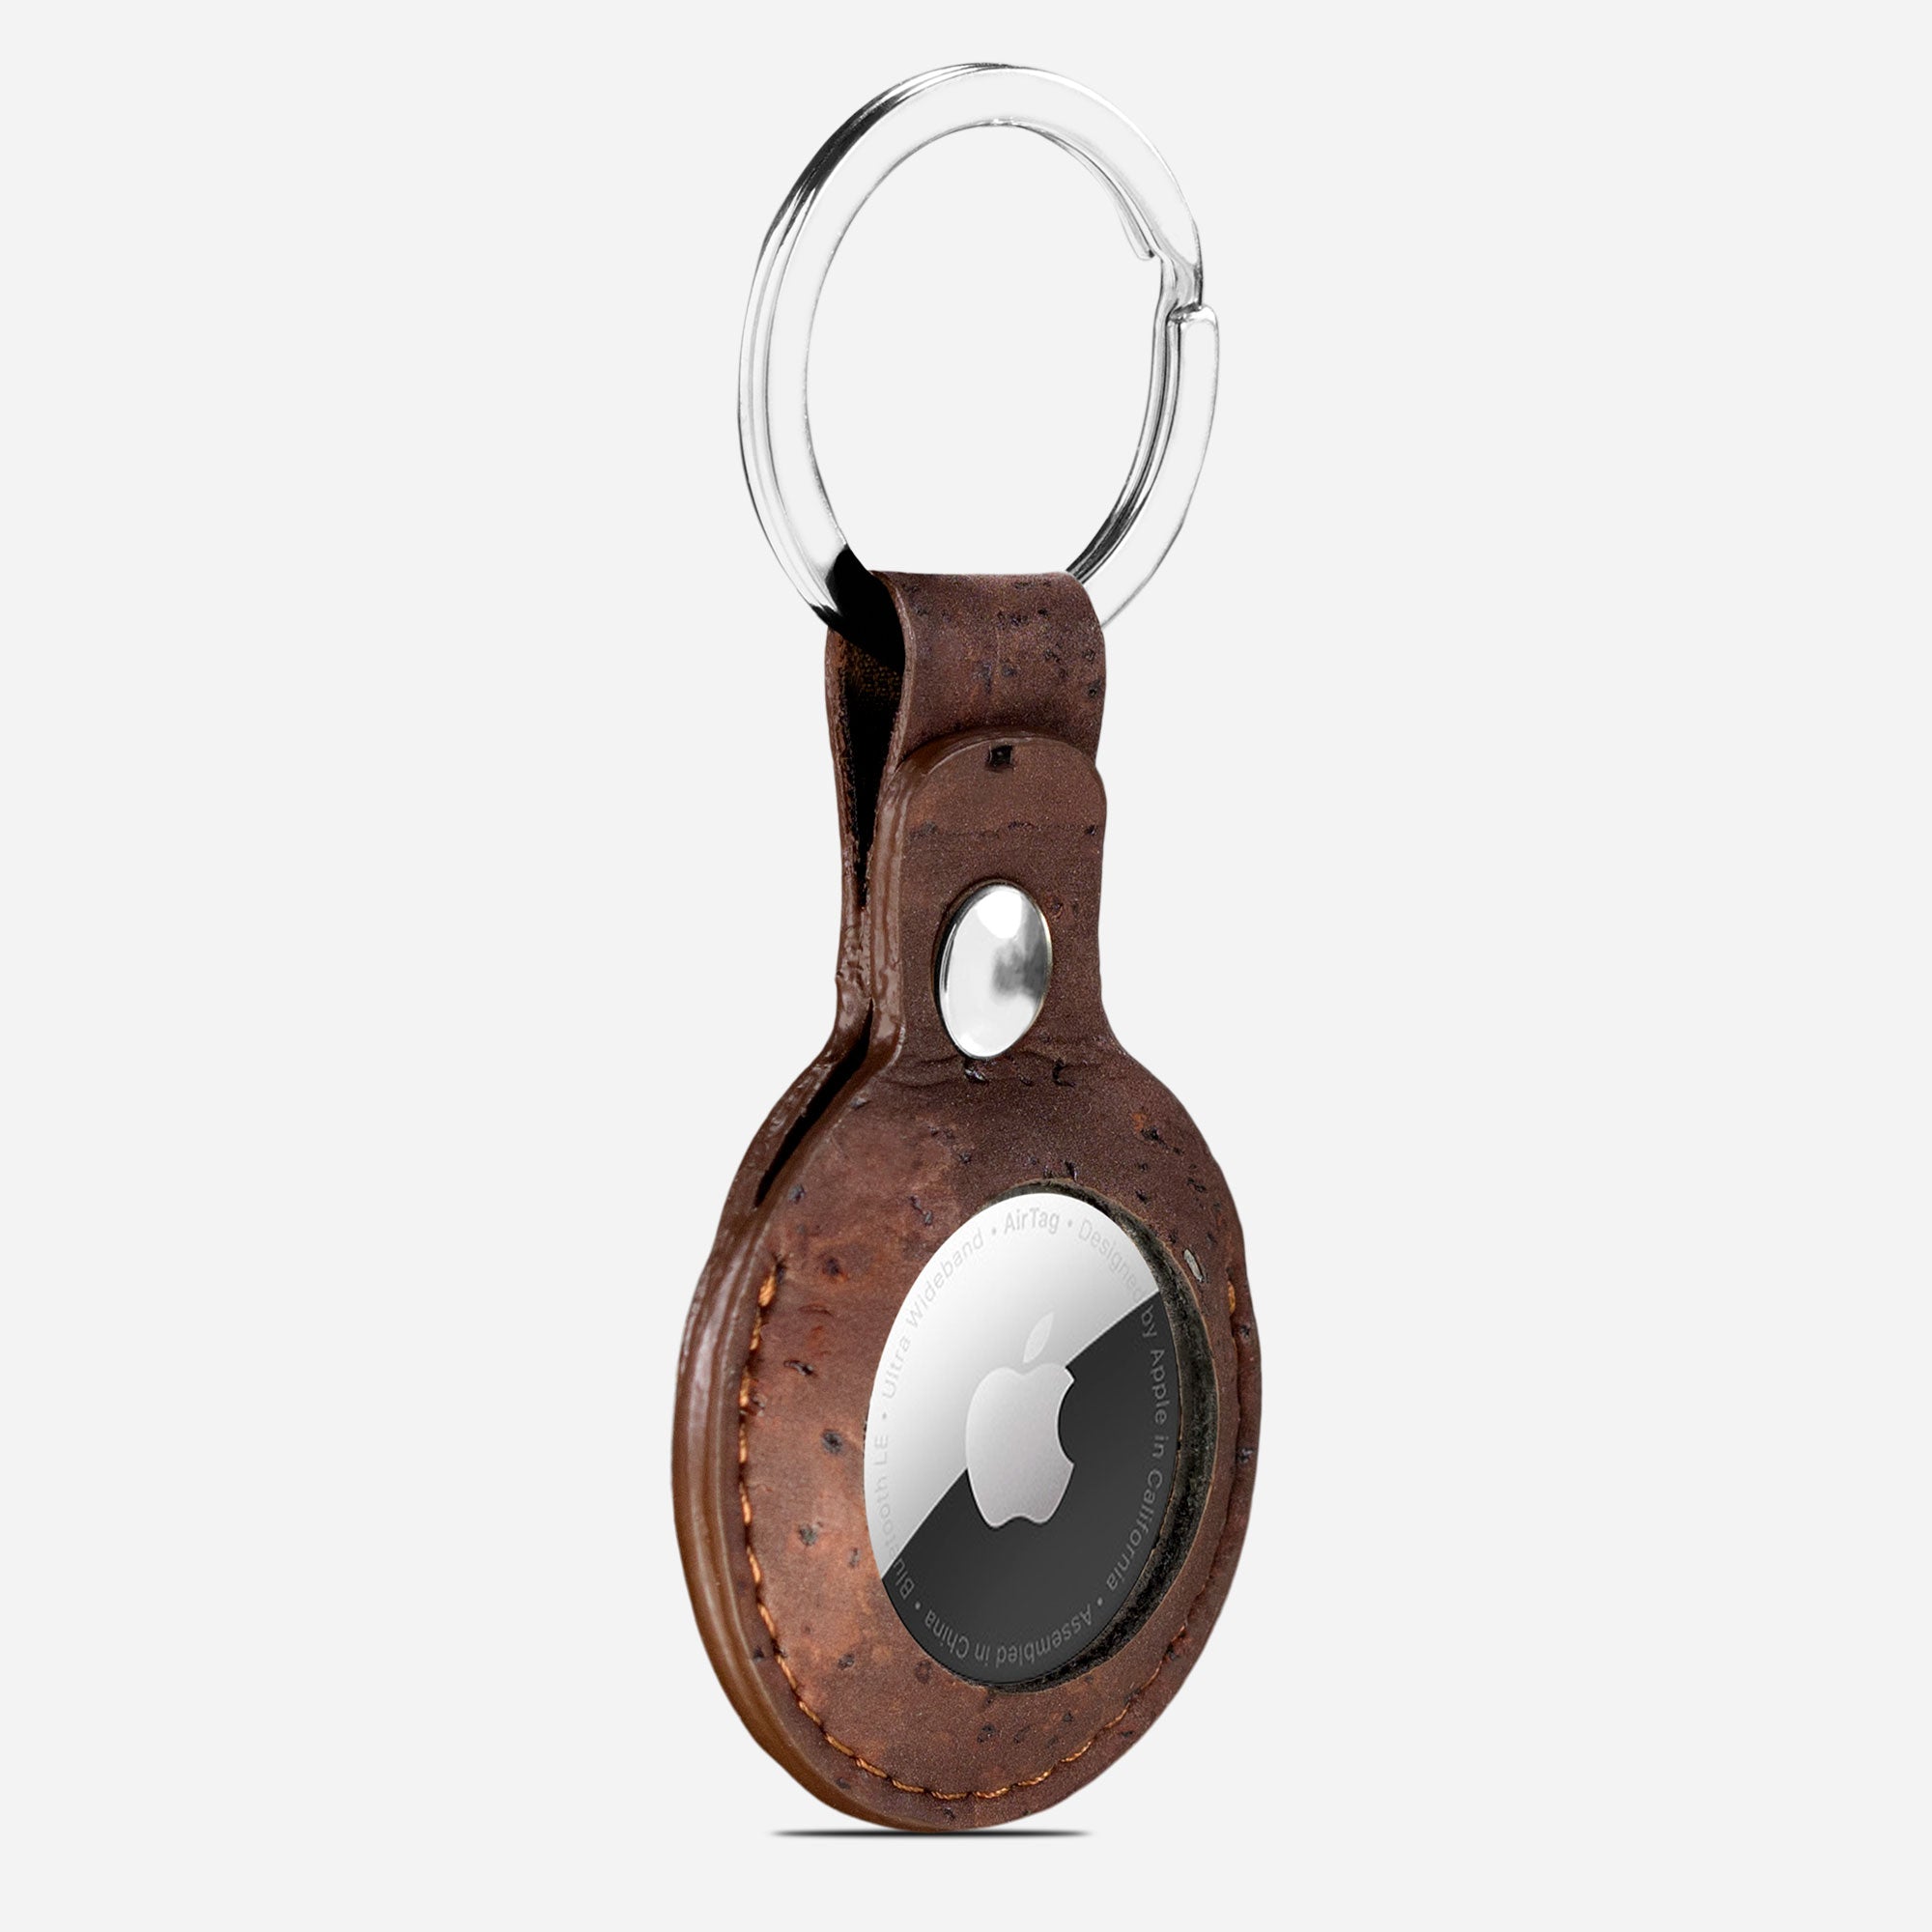 Cork Airtag Keychain for Apple - Stylish and Eco-Friendly Accessory